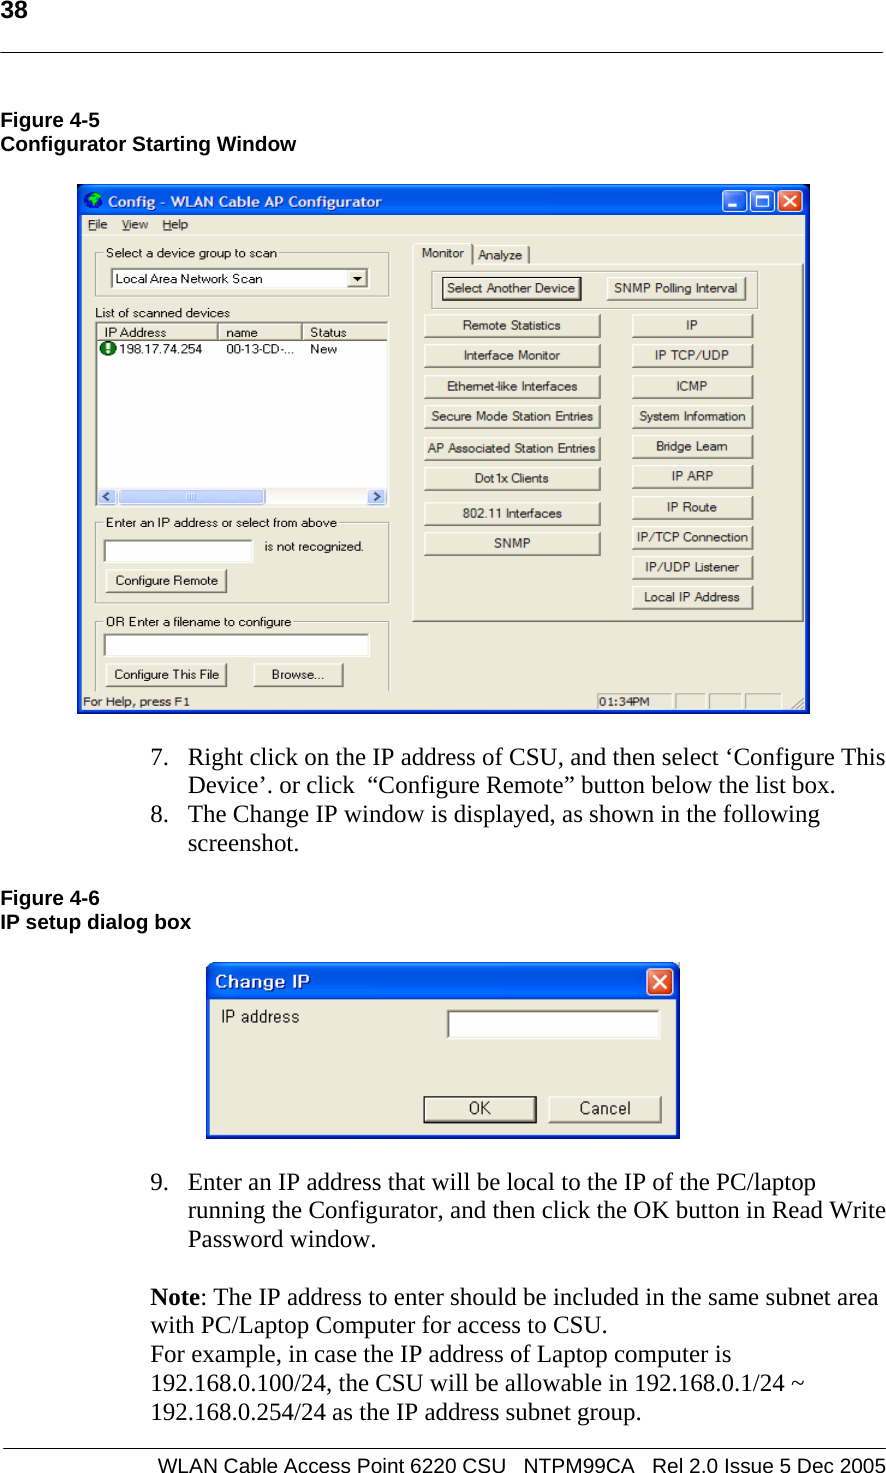   38  WLAN Cable Access Point 6220 CSU   NTPM99CA   Rel 2.0 Issue 5 Dec 2005 Figure 4-5 Configurator Starting Window     7. Right click on the IP address of CSU, and then select ‘Configure This Device’. or click  “Configure Remote” button below the list box.  8. The Change IP window is displayed, as shown in the following screenshot.  Figure 4-6 IP setup dialog box    9. Enter an IP address that will be local to the IP of the PC/laptop running the Configurator, and then click the OK button in Read Write Password window.    Note: The IP address to enter should be included in the same subnet area with PC/Laptop Computer for access to CSU.  For example, in case the IP address of Laptop computer is 192.168.0.100/24, the CSU will be allowable in 192.168.0.1/24 ~ 192.168.0.254/24 as the IP address subnet group. 